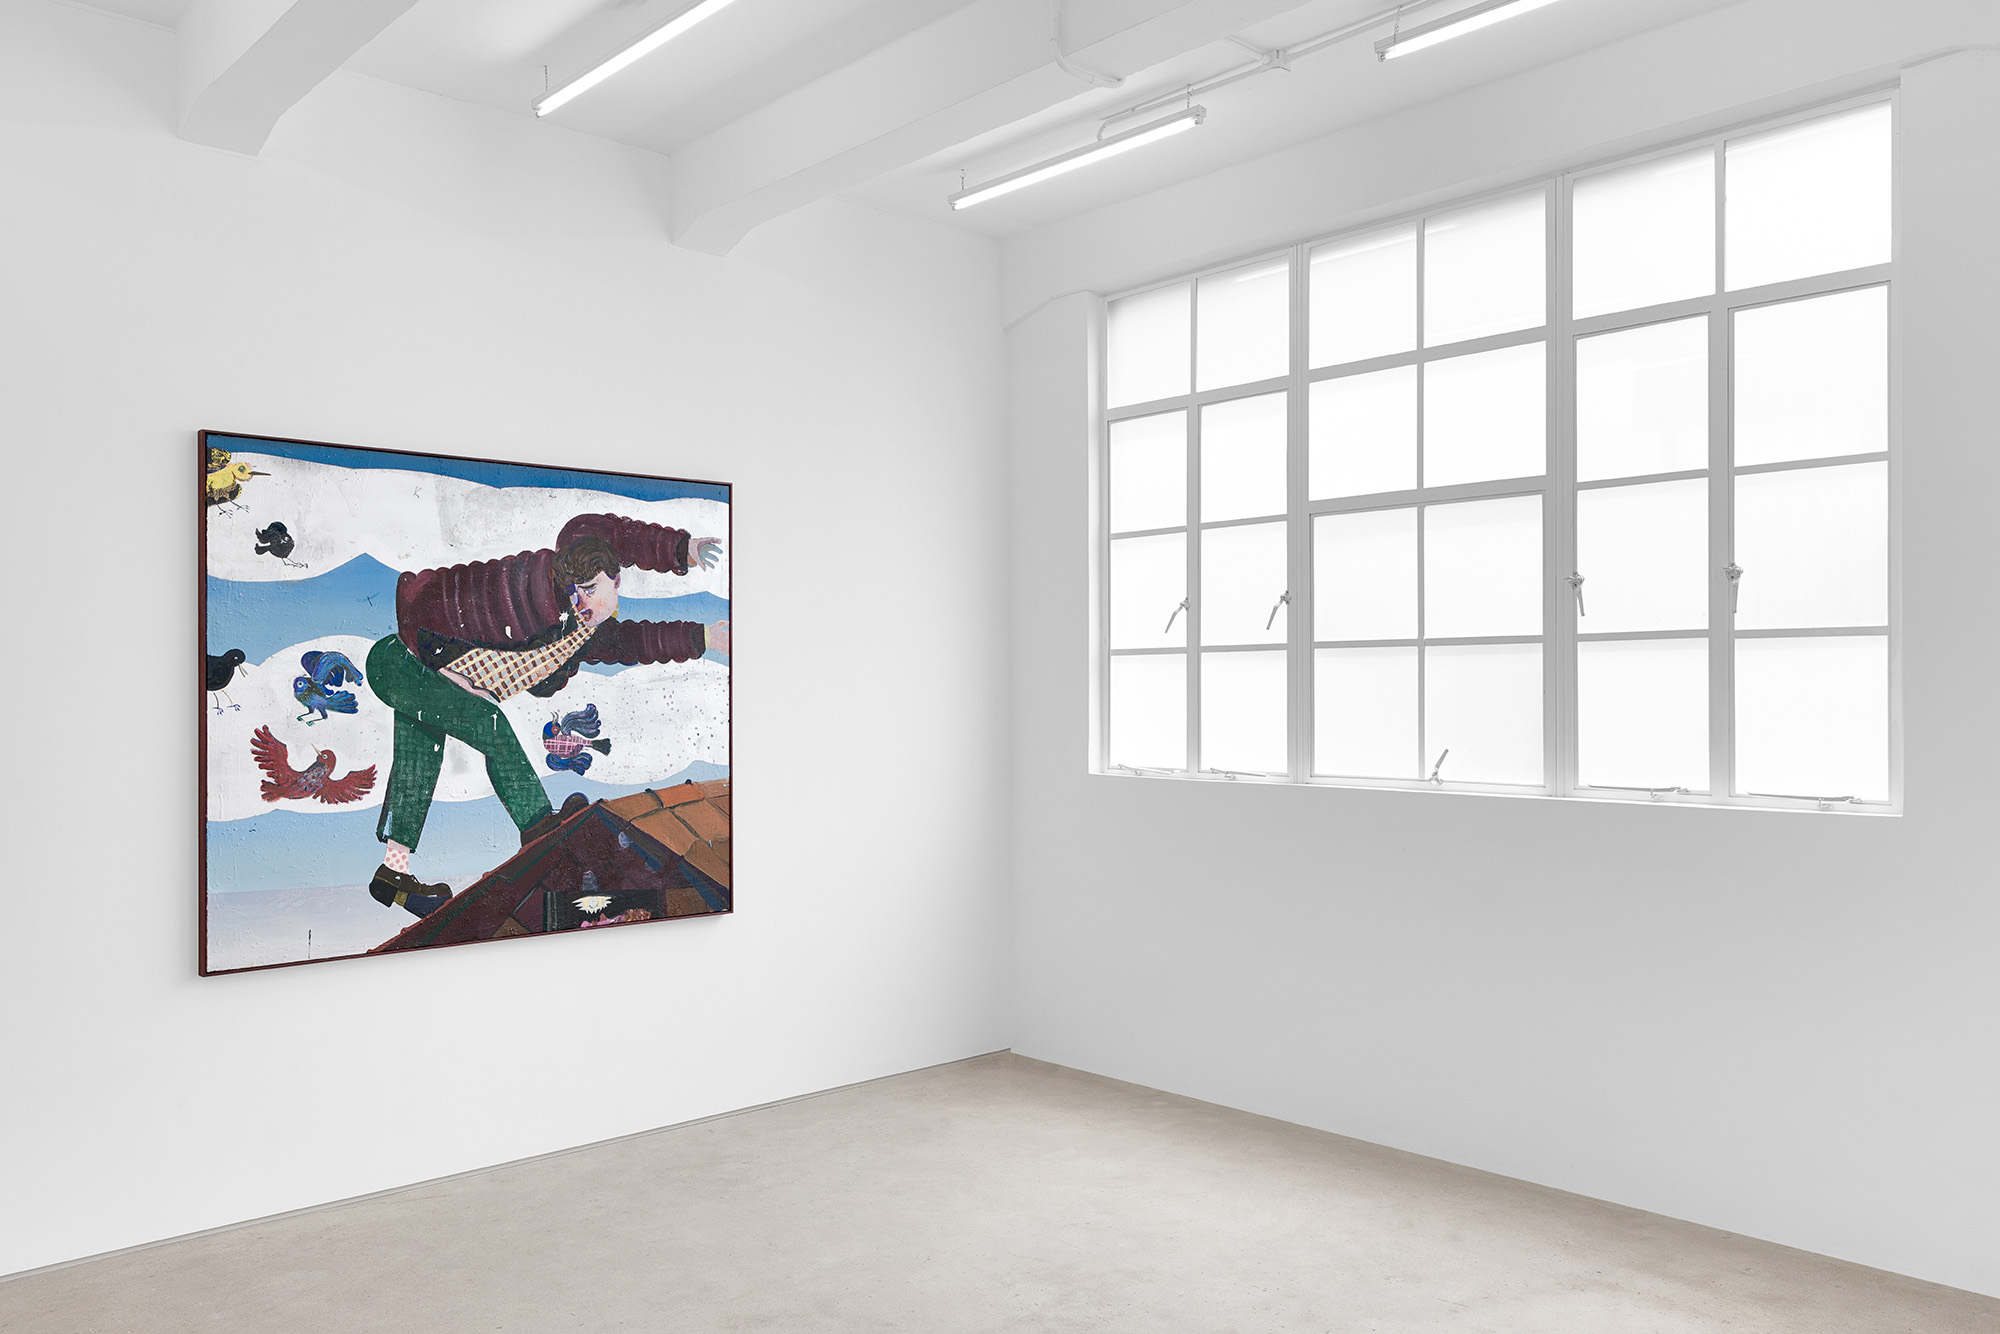 Installation view of group exhibition, Vacation II, at Gallery Vacancy, featuring work by Pieter Jennes.